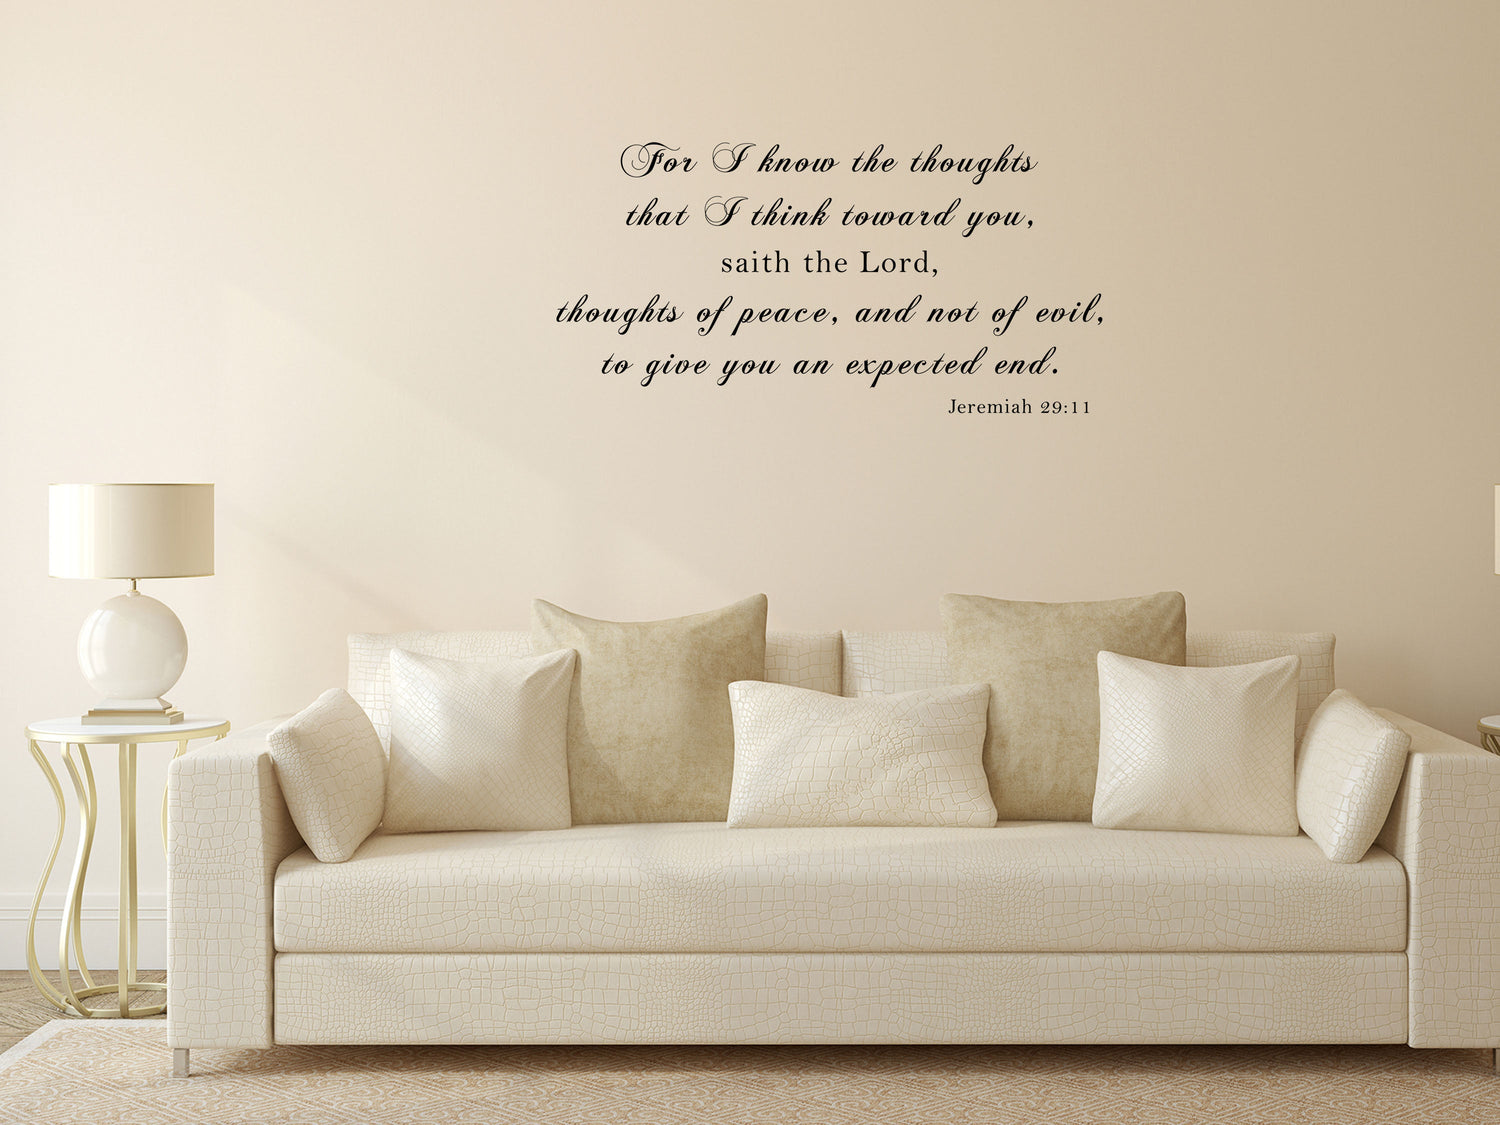 Jeremiah 29:11 - Scripture Vinyl Wall Quote Vinyl Wall Decal Inspirational Wall Signs 